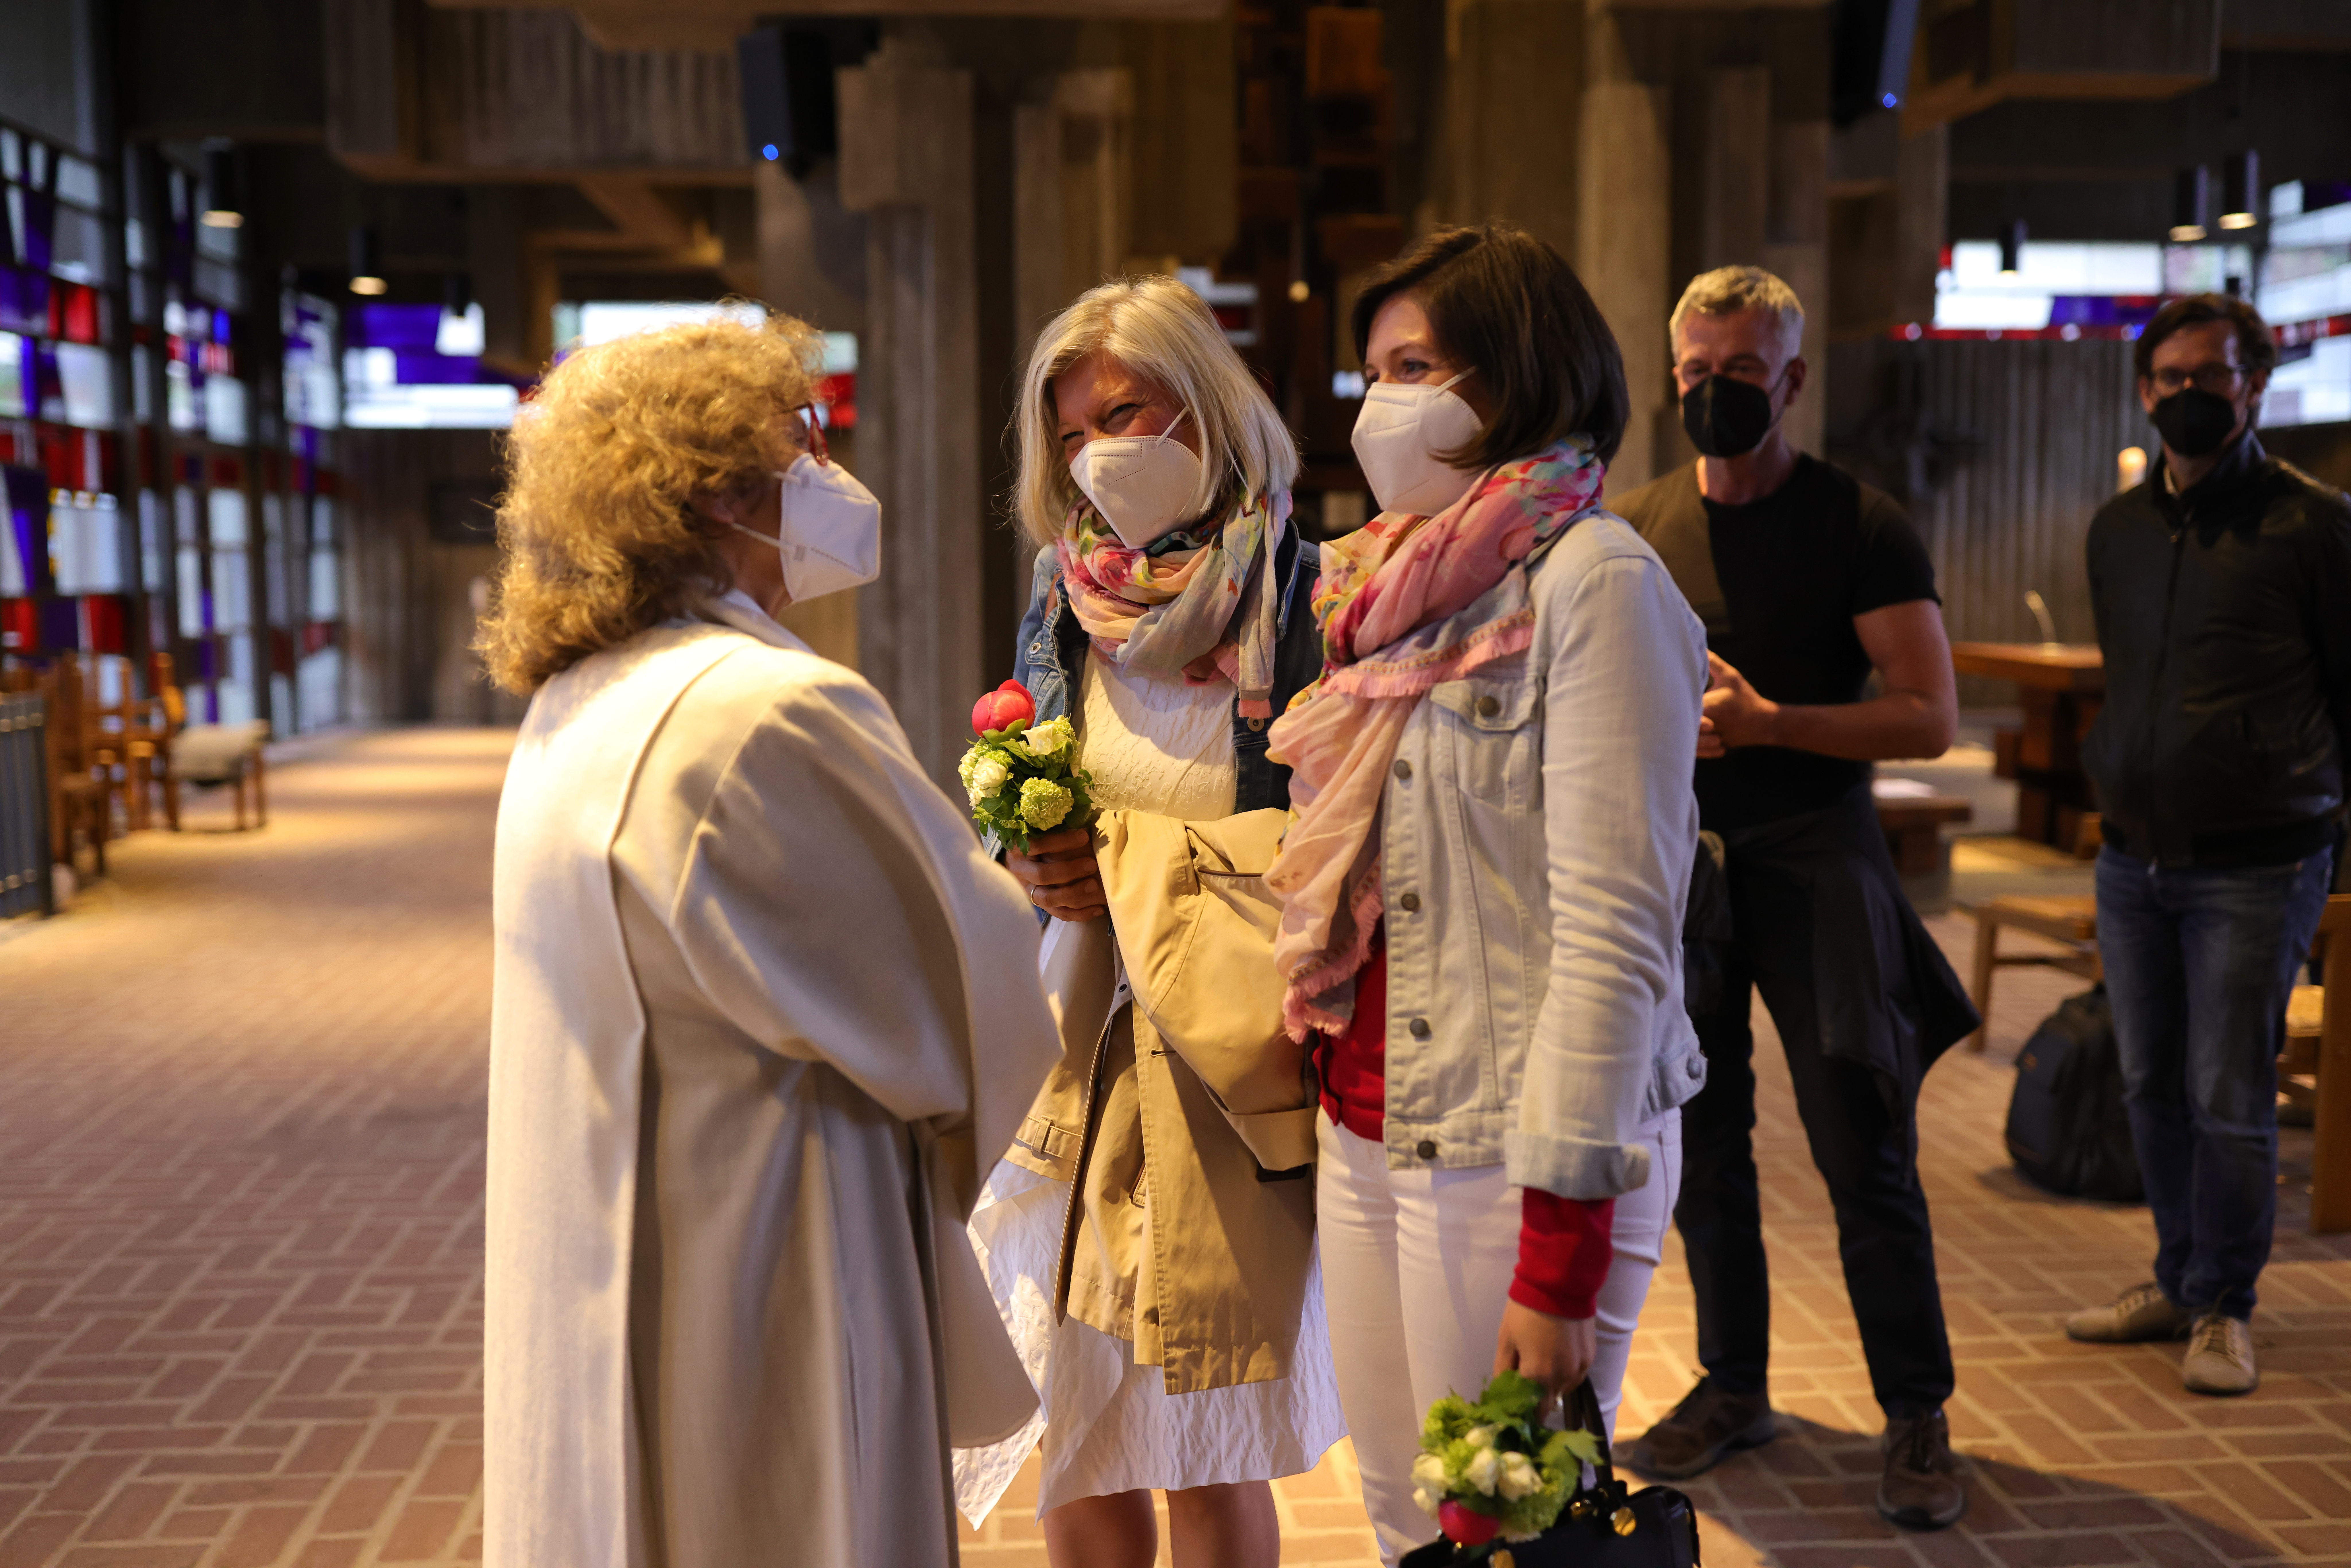 Brigitte Schmidt (L), a pastoral worker chats with Nini and Juliana Weinmeister-Bisping after she blesses the same-sex couple at the Catholic St. Johannes XXIII church in Cologne, Germany. The Catholic Church in Germany is currently going through a tumultuous phase that includes a high number of followers leaving the Church due to what many say are insufficient consequences from wide-scale sexual abuse by priests as well as far-reaching calls for reform for greater inclusion of women and recognition of gay marriage.